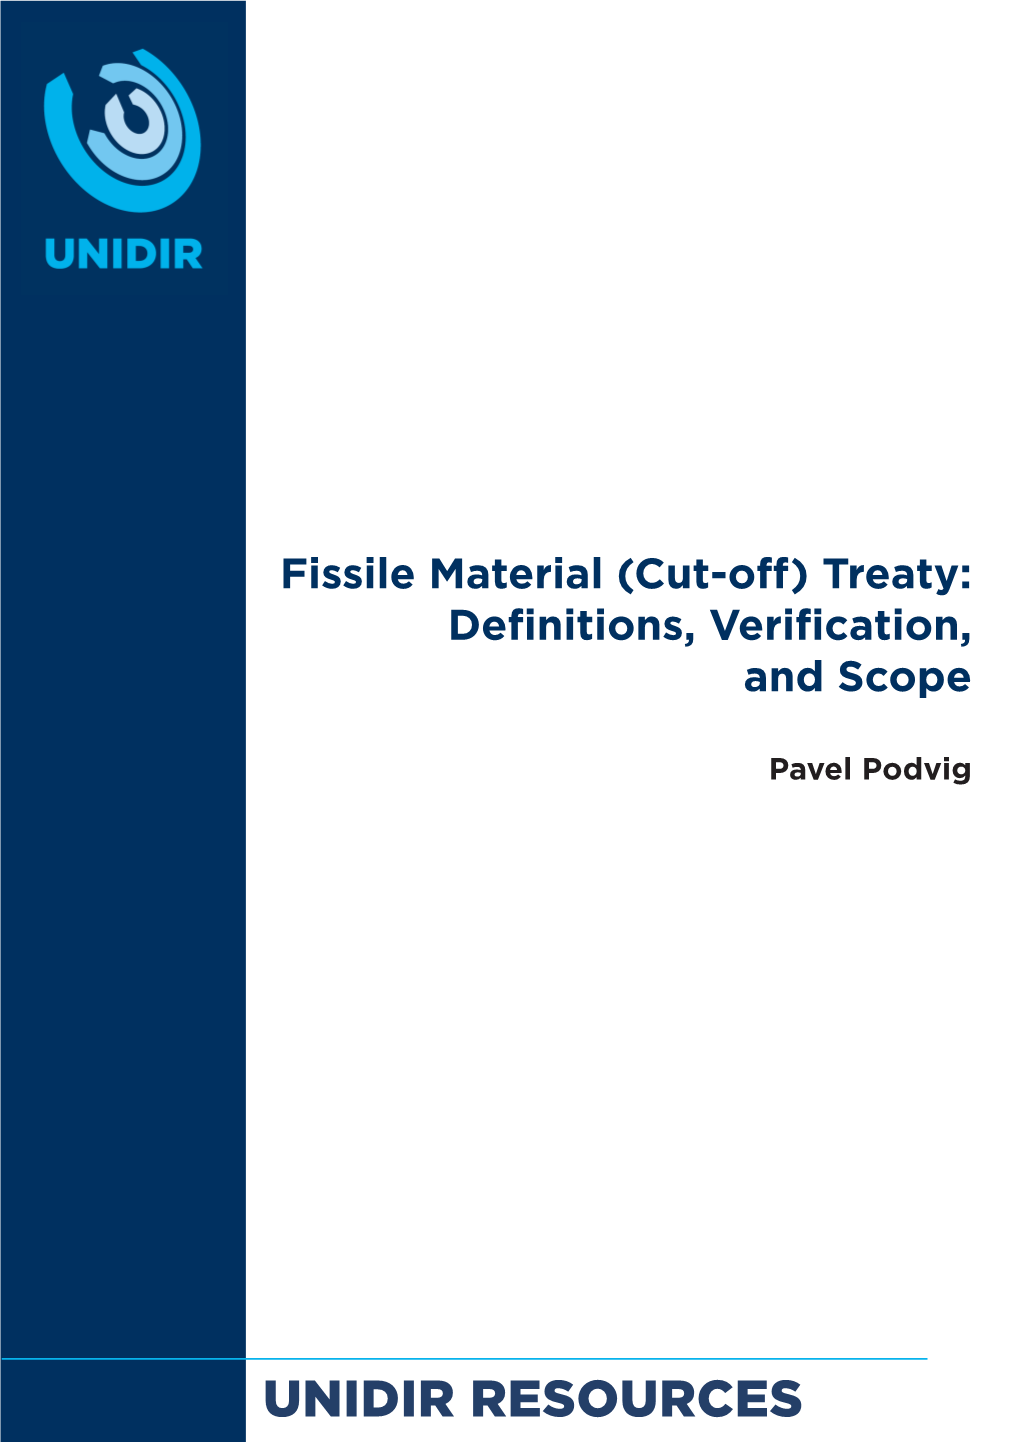 Fissile Material (Cut-Off) Treaty: Definitions, Verification, and Scope